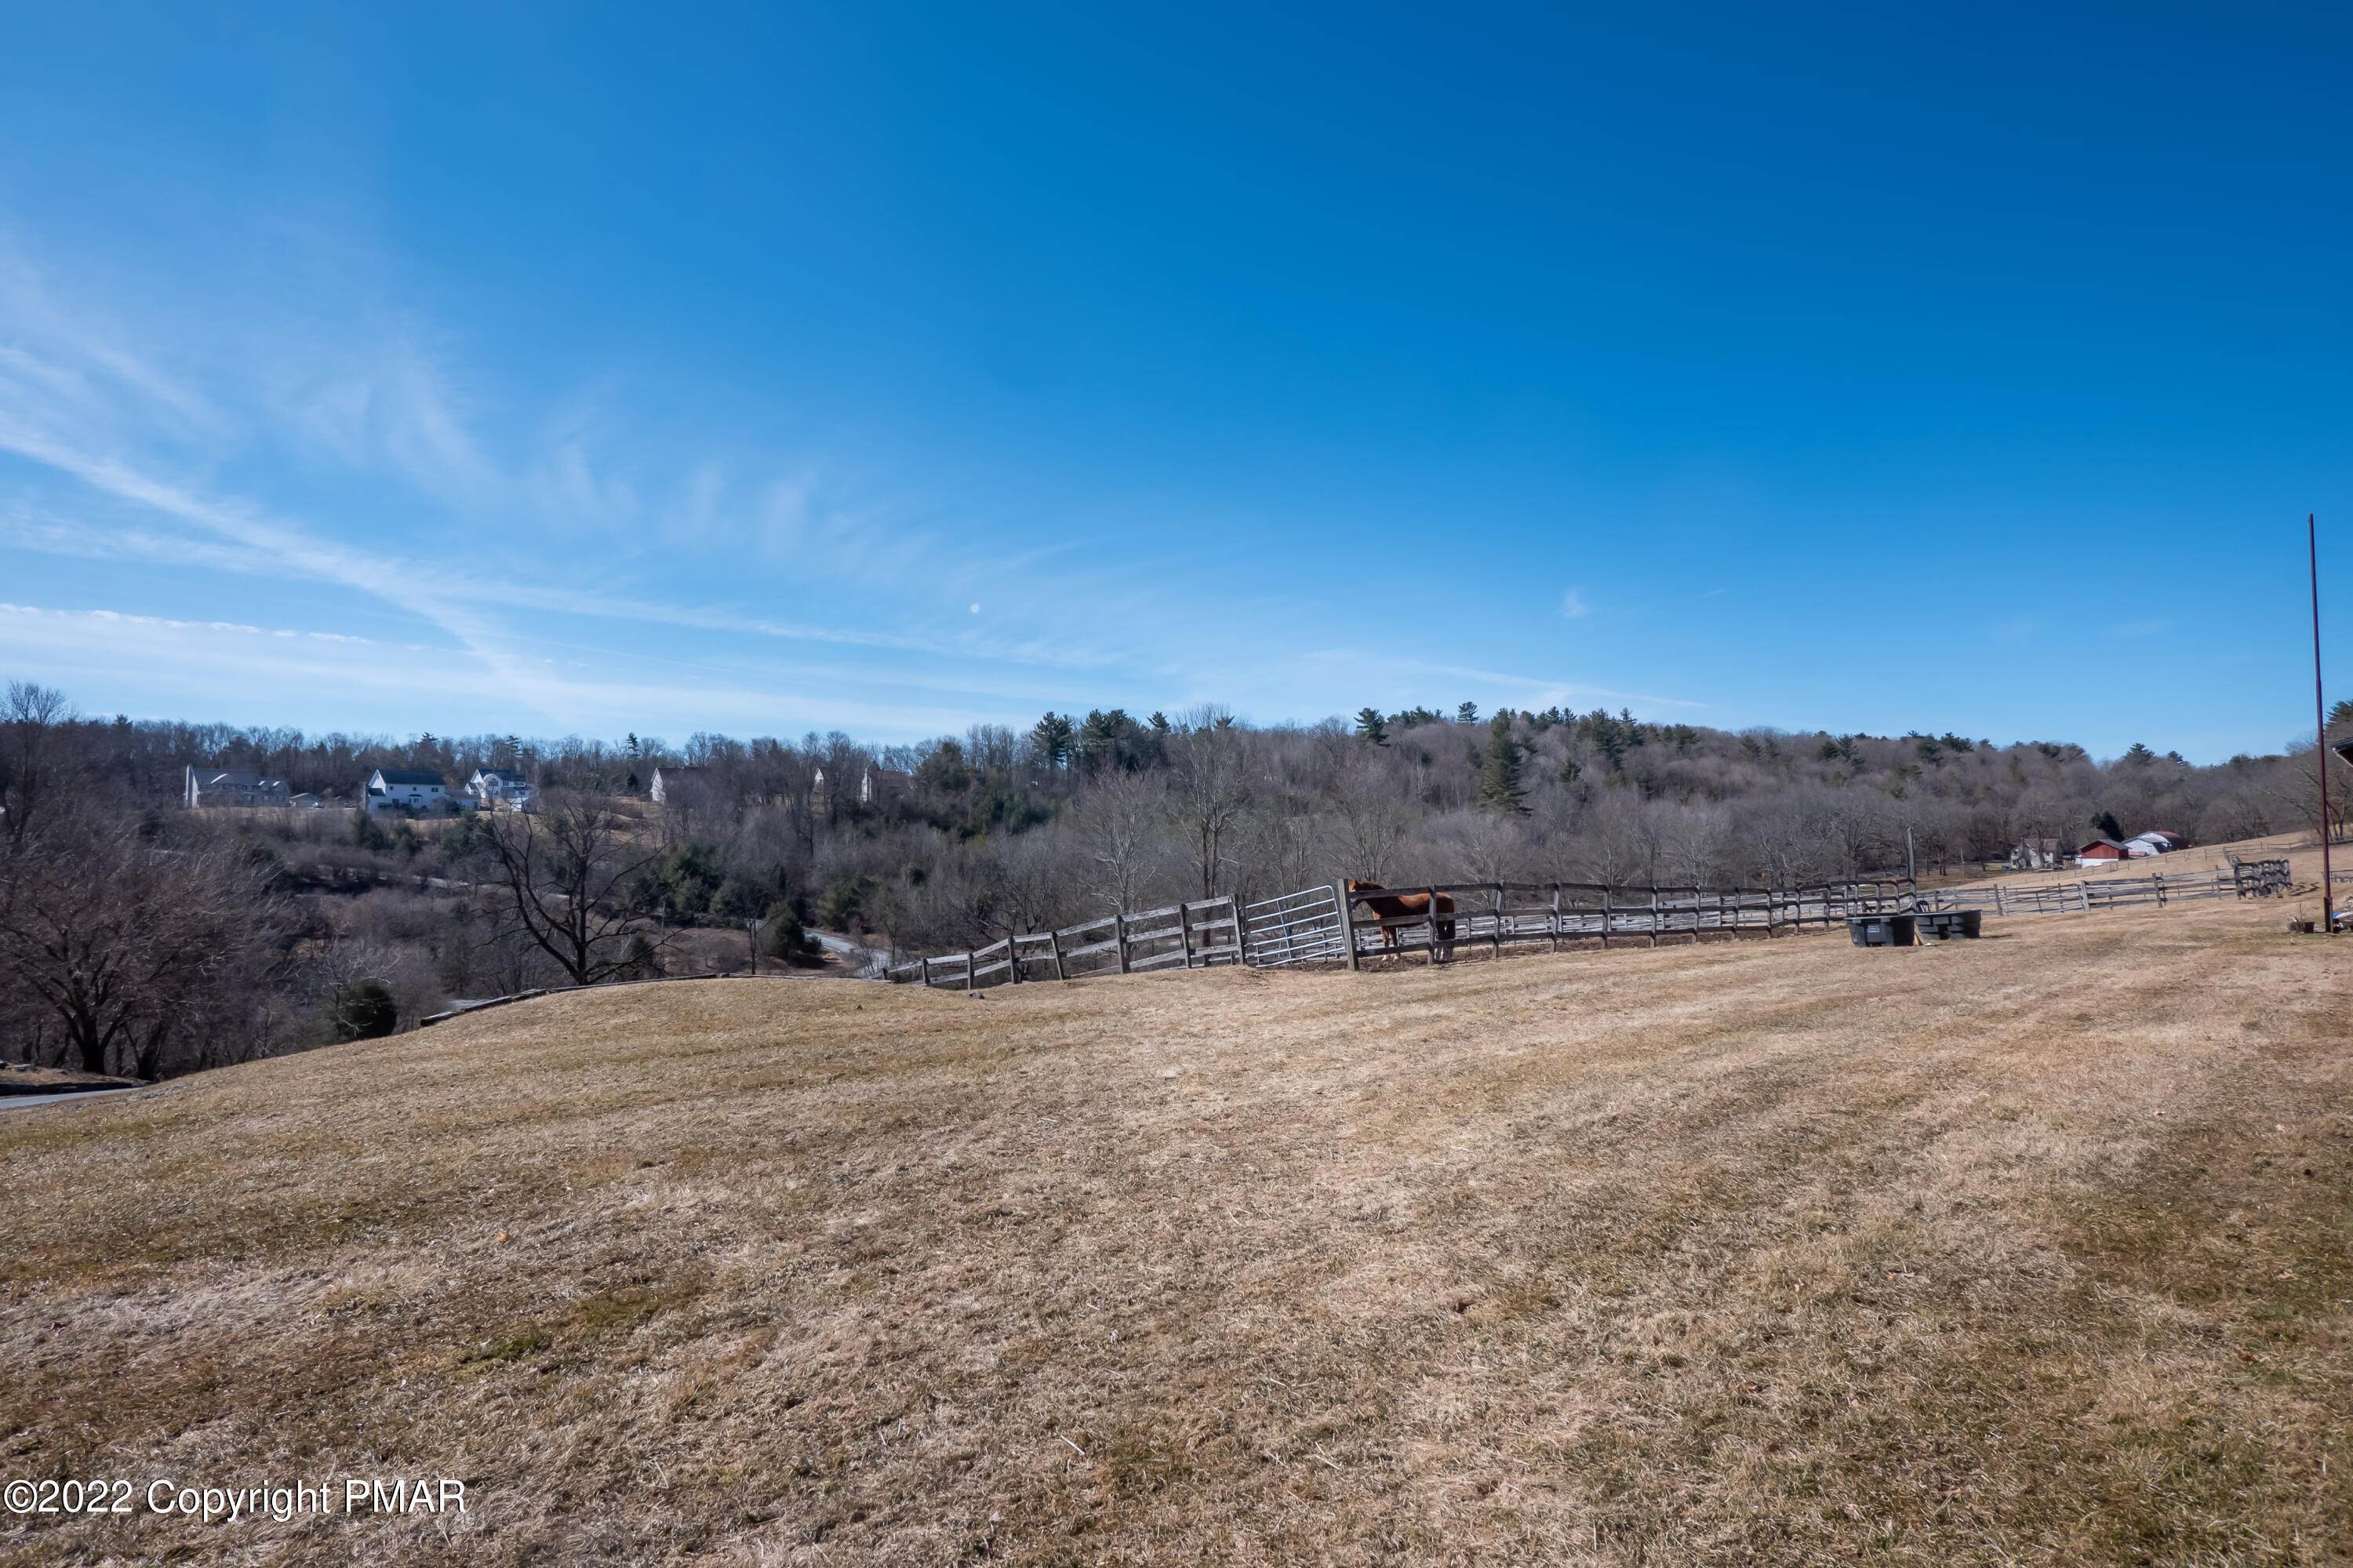 70. Farm and Ranch Properties for Sale at 827 Pheasant Run Rd Effort, Pennsylvania 18330 United States